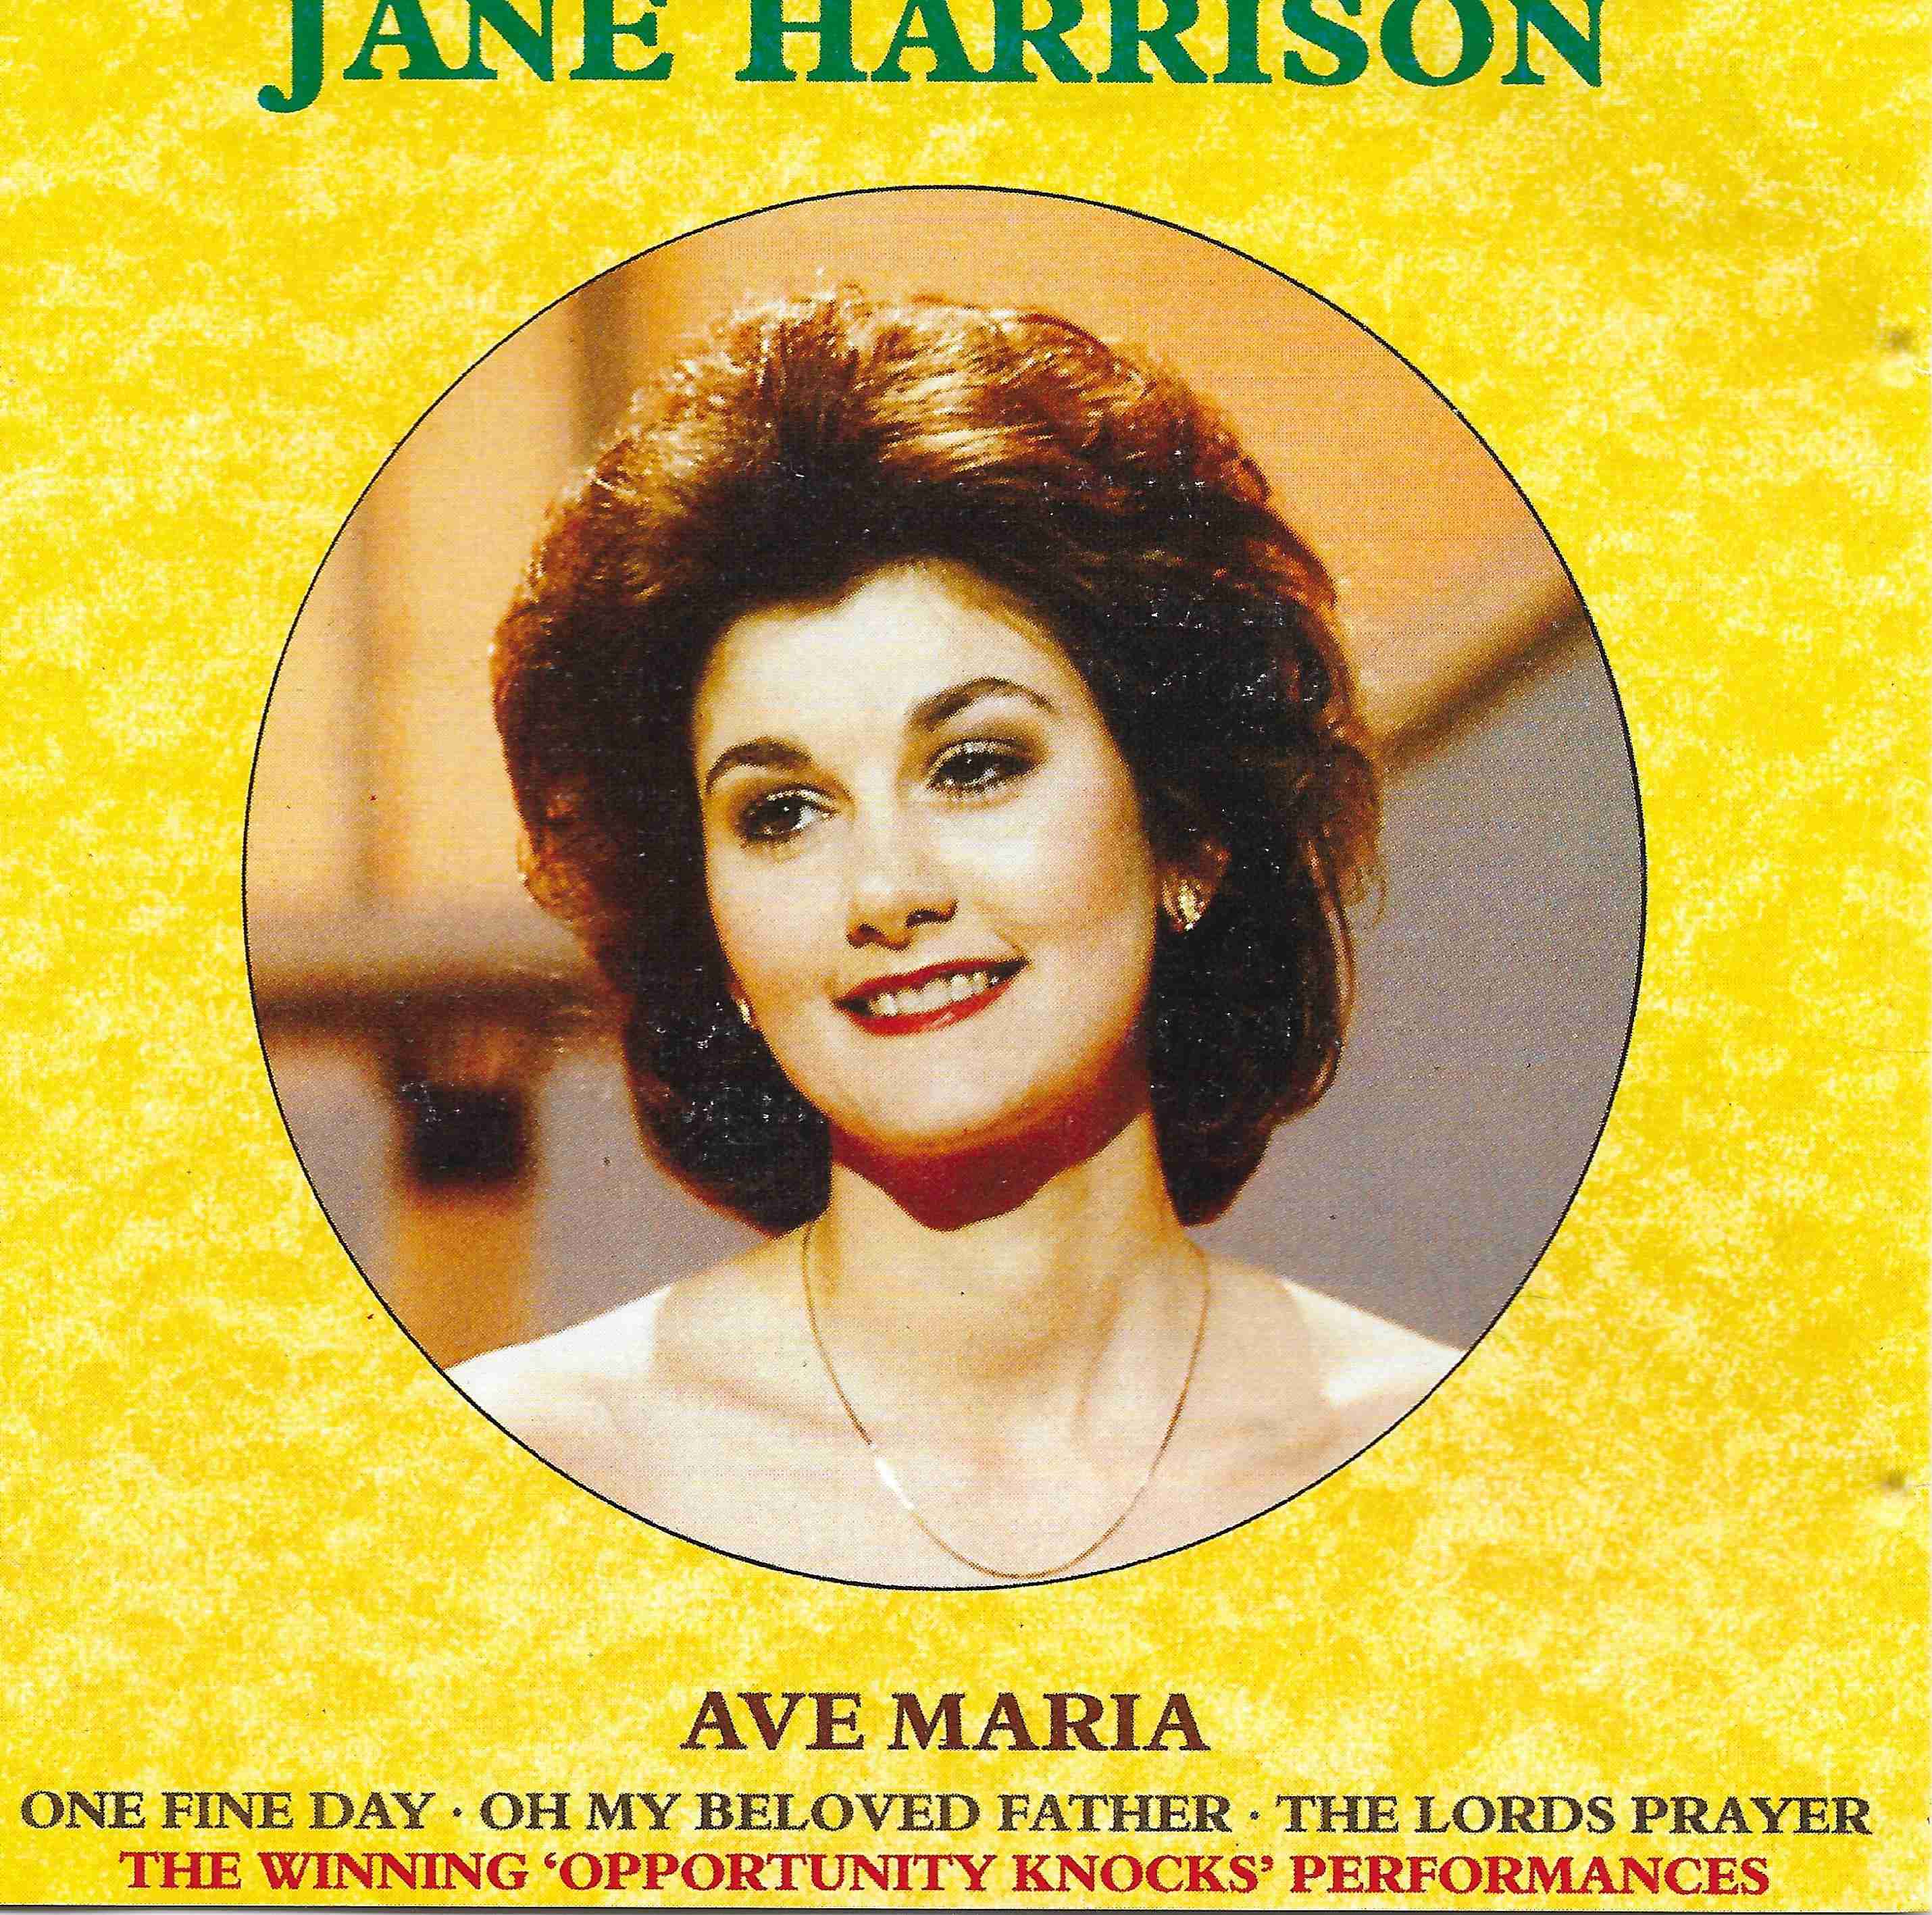 Picture of Ave Maria by artist Bach / Gounod / Puccini / Malotte / Jane Harrison from the BBC cdsingles - Records and Tapes library